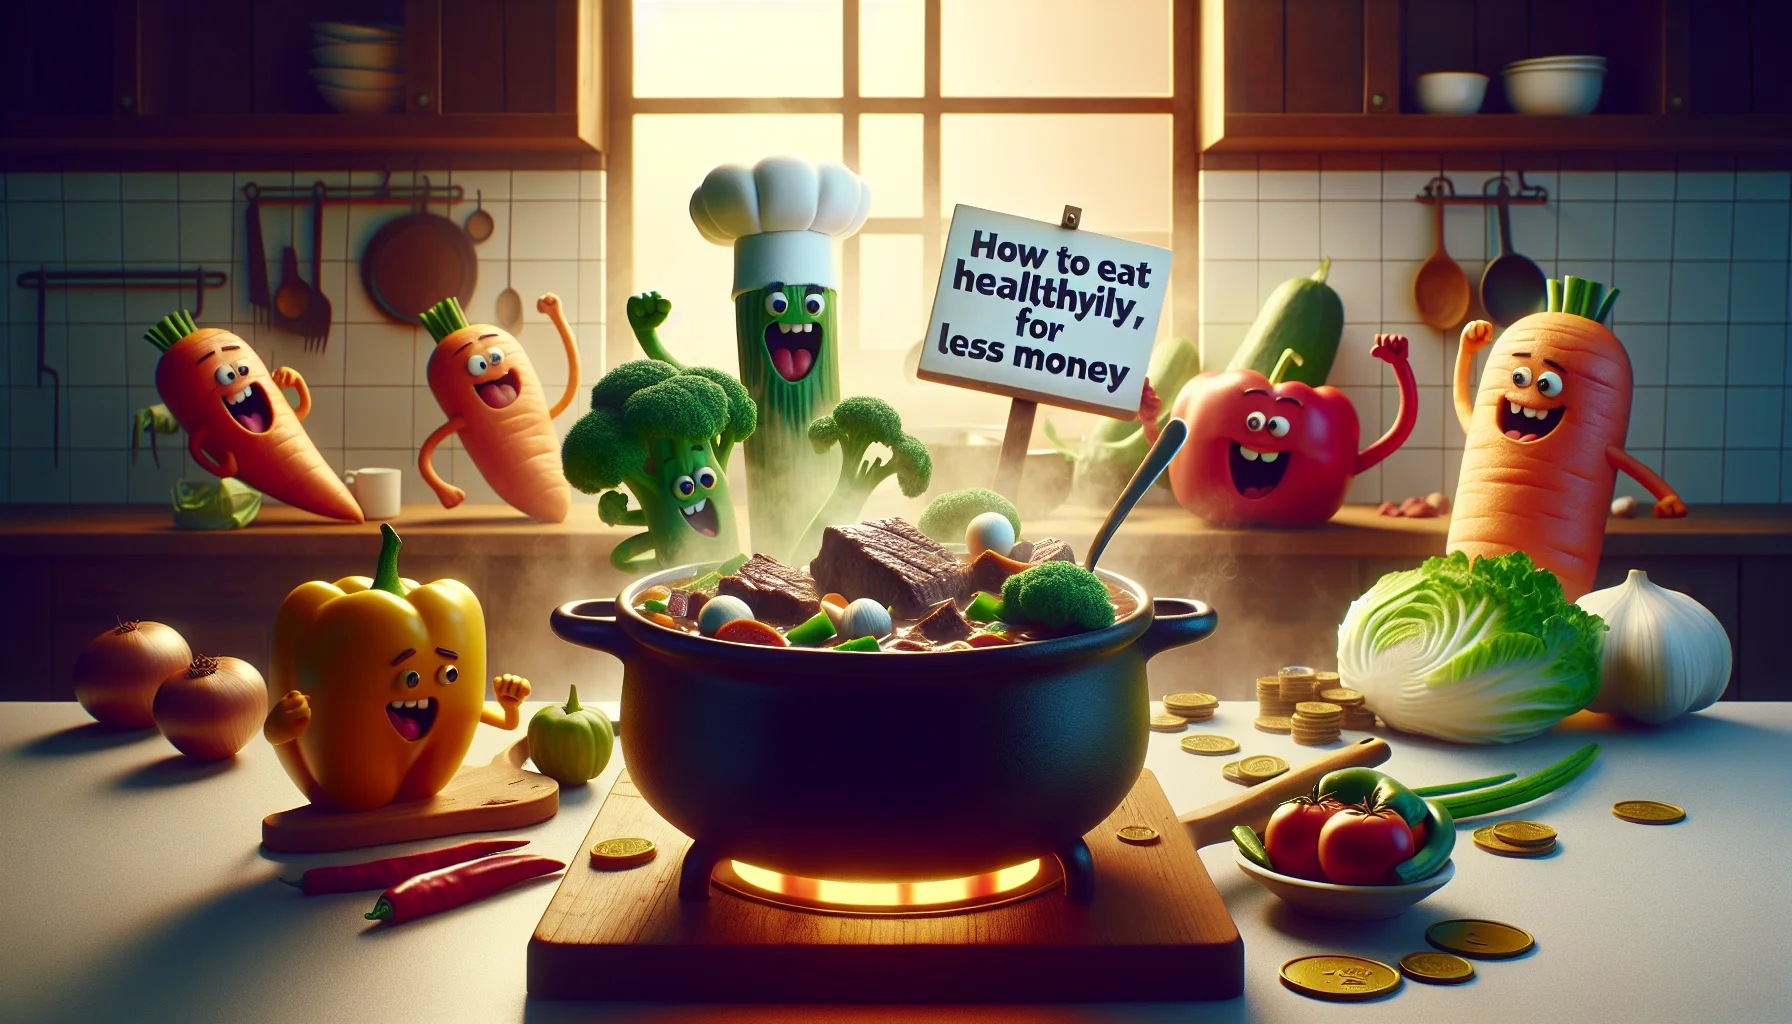 Create a humorous and enticing scene demonstrating how to eat healthily for less money. A stew, made by an imaginary chef, is front and center. The stew is simmering with healthy ingredients like tender chunks of beef, an abundance of vegetables, and rich, savory broth. Details that underscore its affordability like discounted price tags or coins are scattered around. Characters in the form of anthropomorphic vegetable and beef figures are expressing their excitement and attractiveness by acting in amusing and theatrical ways. This lively scene unfolds in a warm, welcoming kitchen.